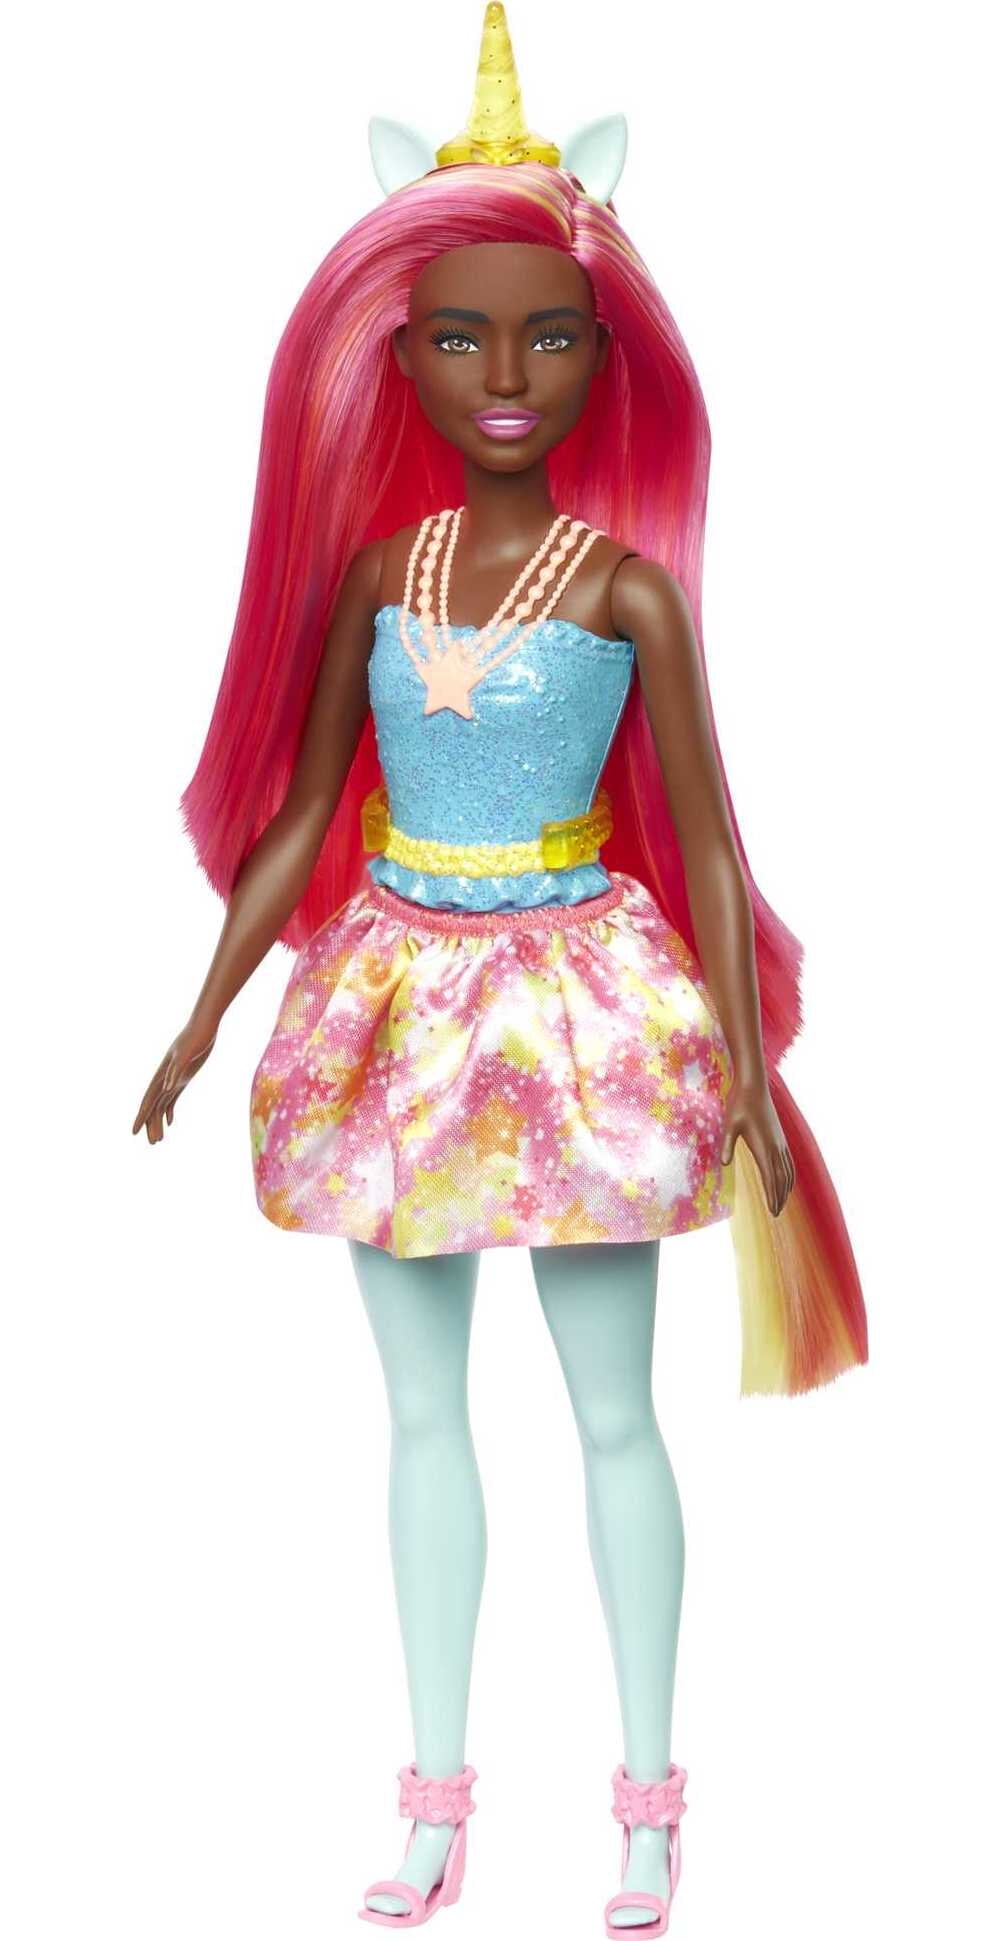 Barbie Dreamtopia Unicorn Doll with Headband & Tail, Bold Pink Hair & Starry Skirt